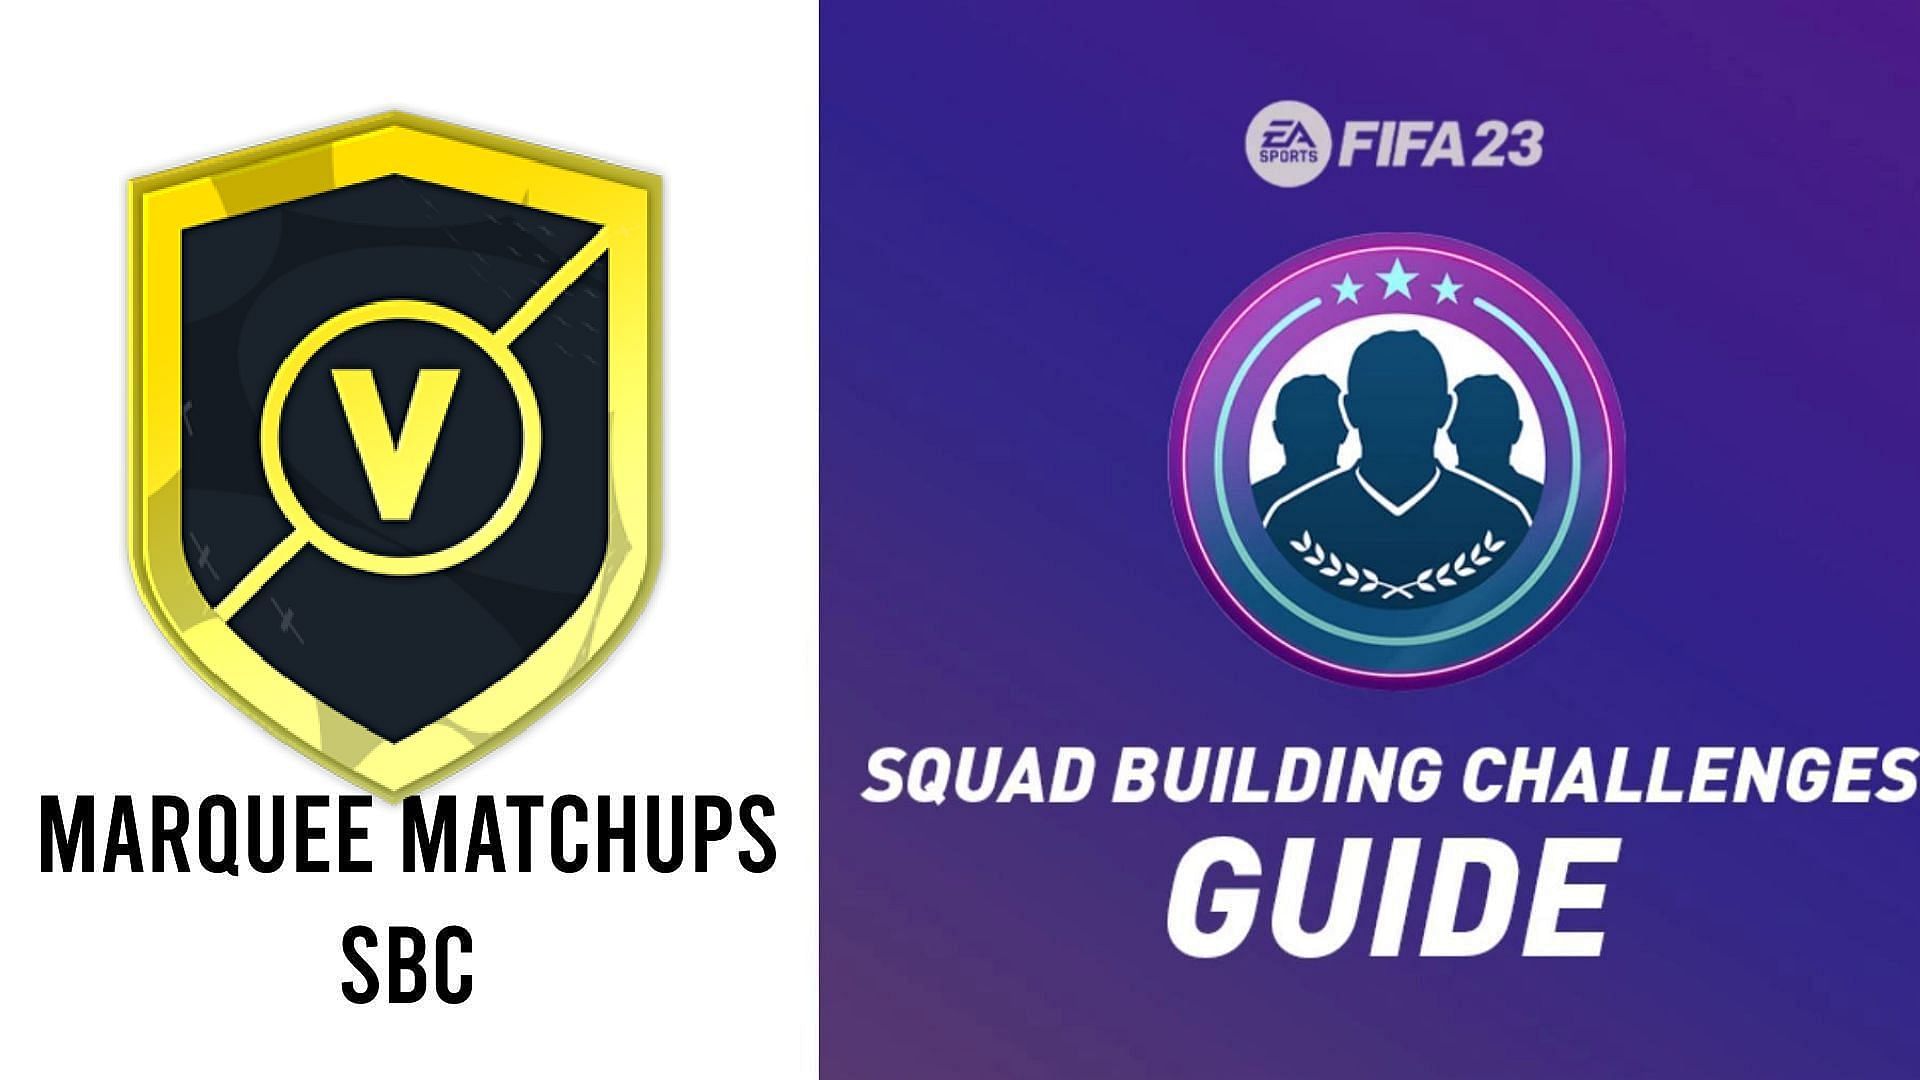 How to complete Jan. 26's Marquee Matchups SBC in FIFA 23 Ultimate